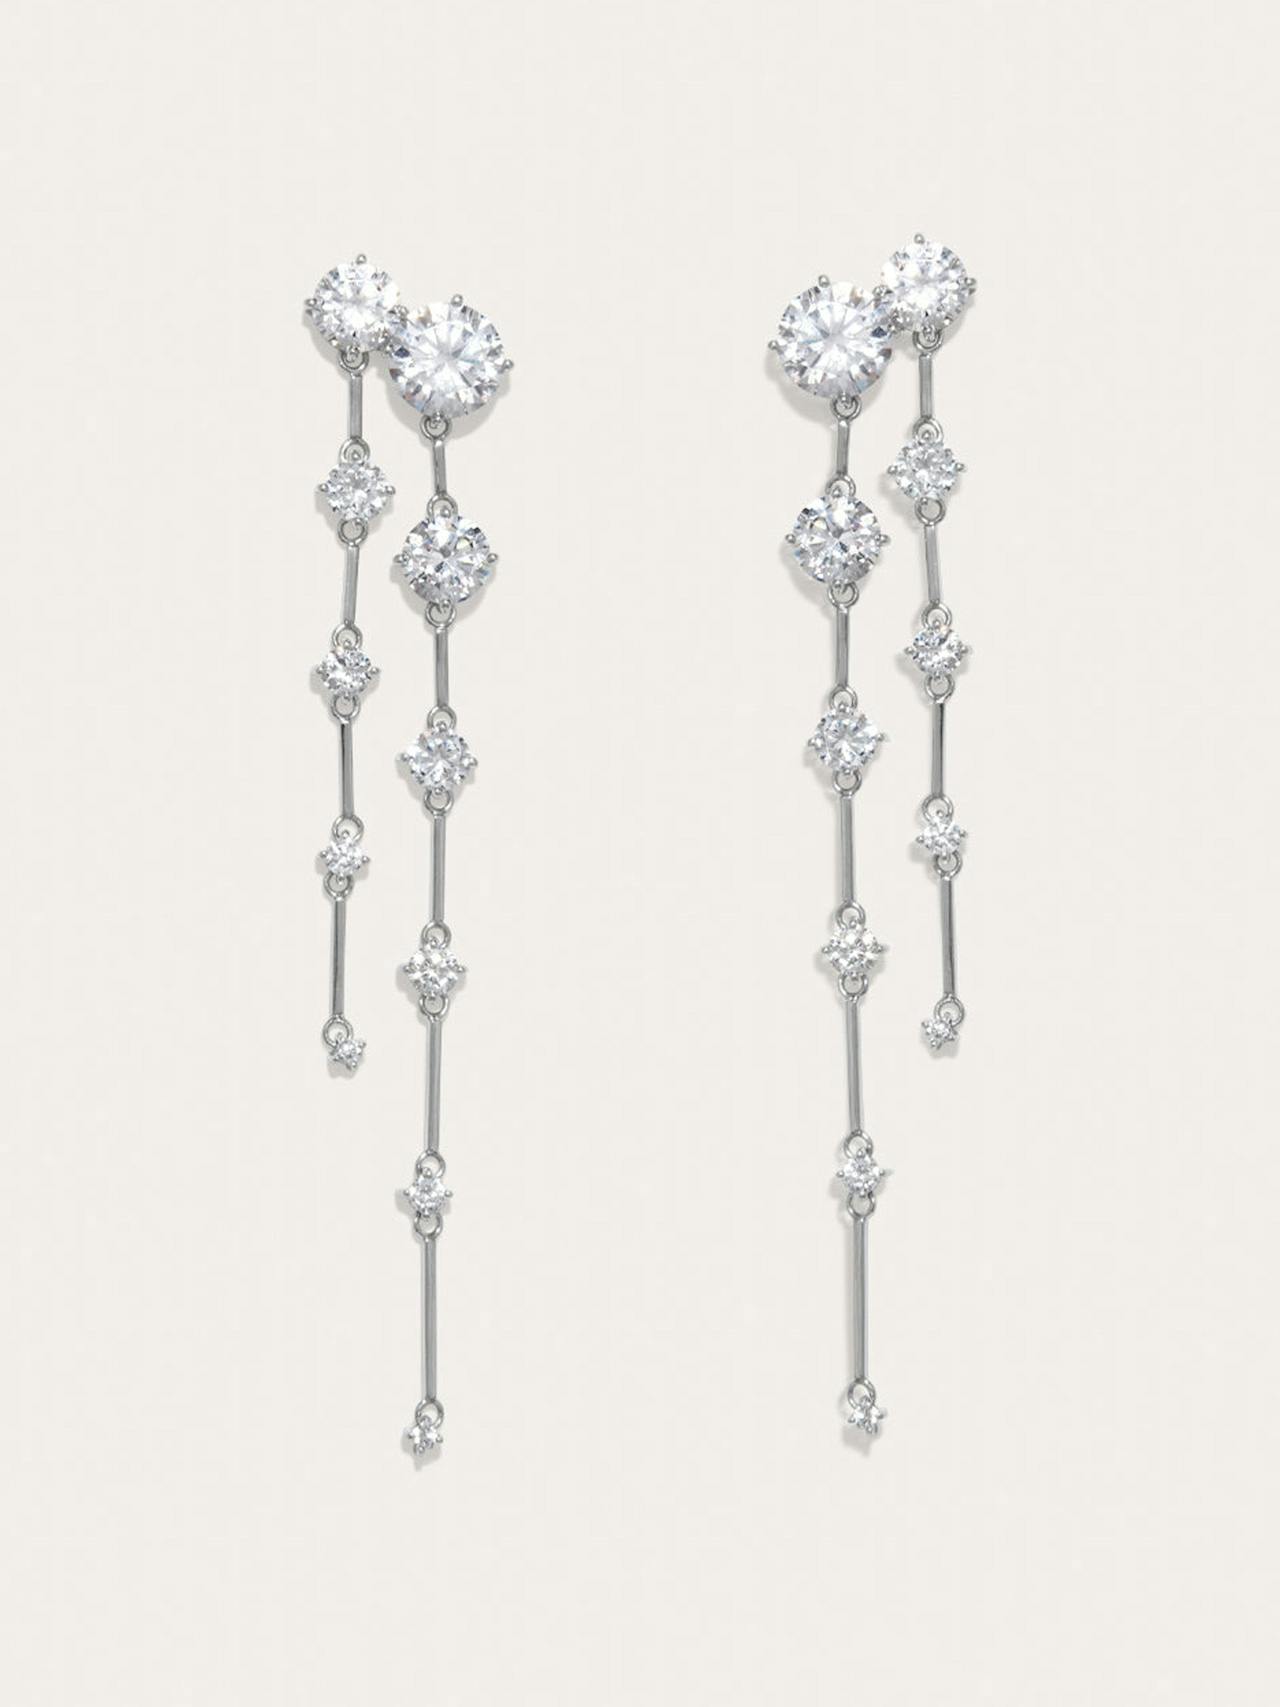 Orbiting cubic zirconia and rhodium plated earrings